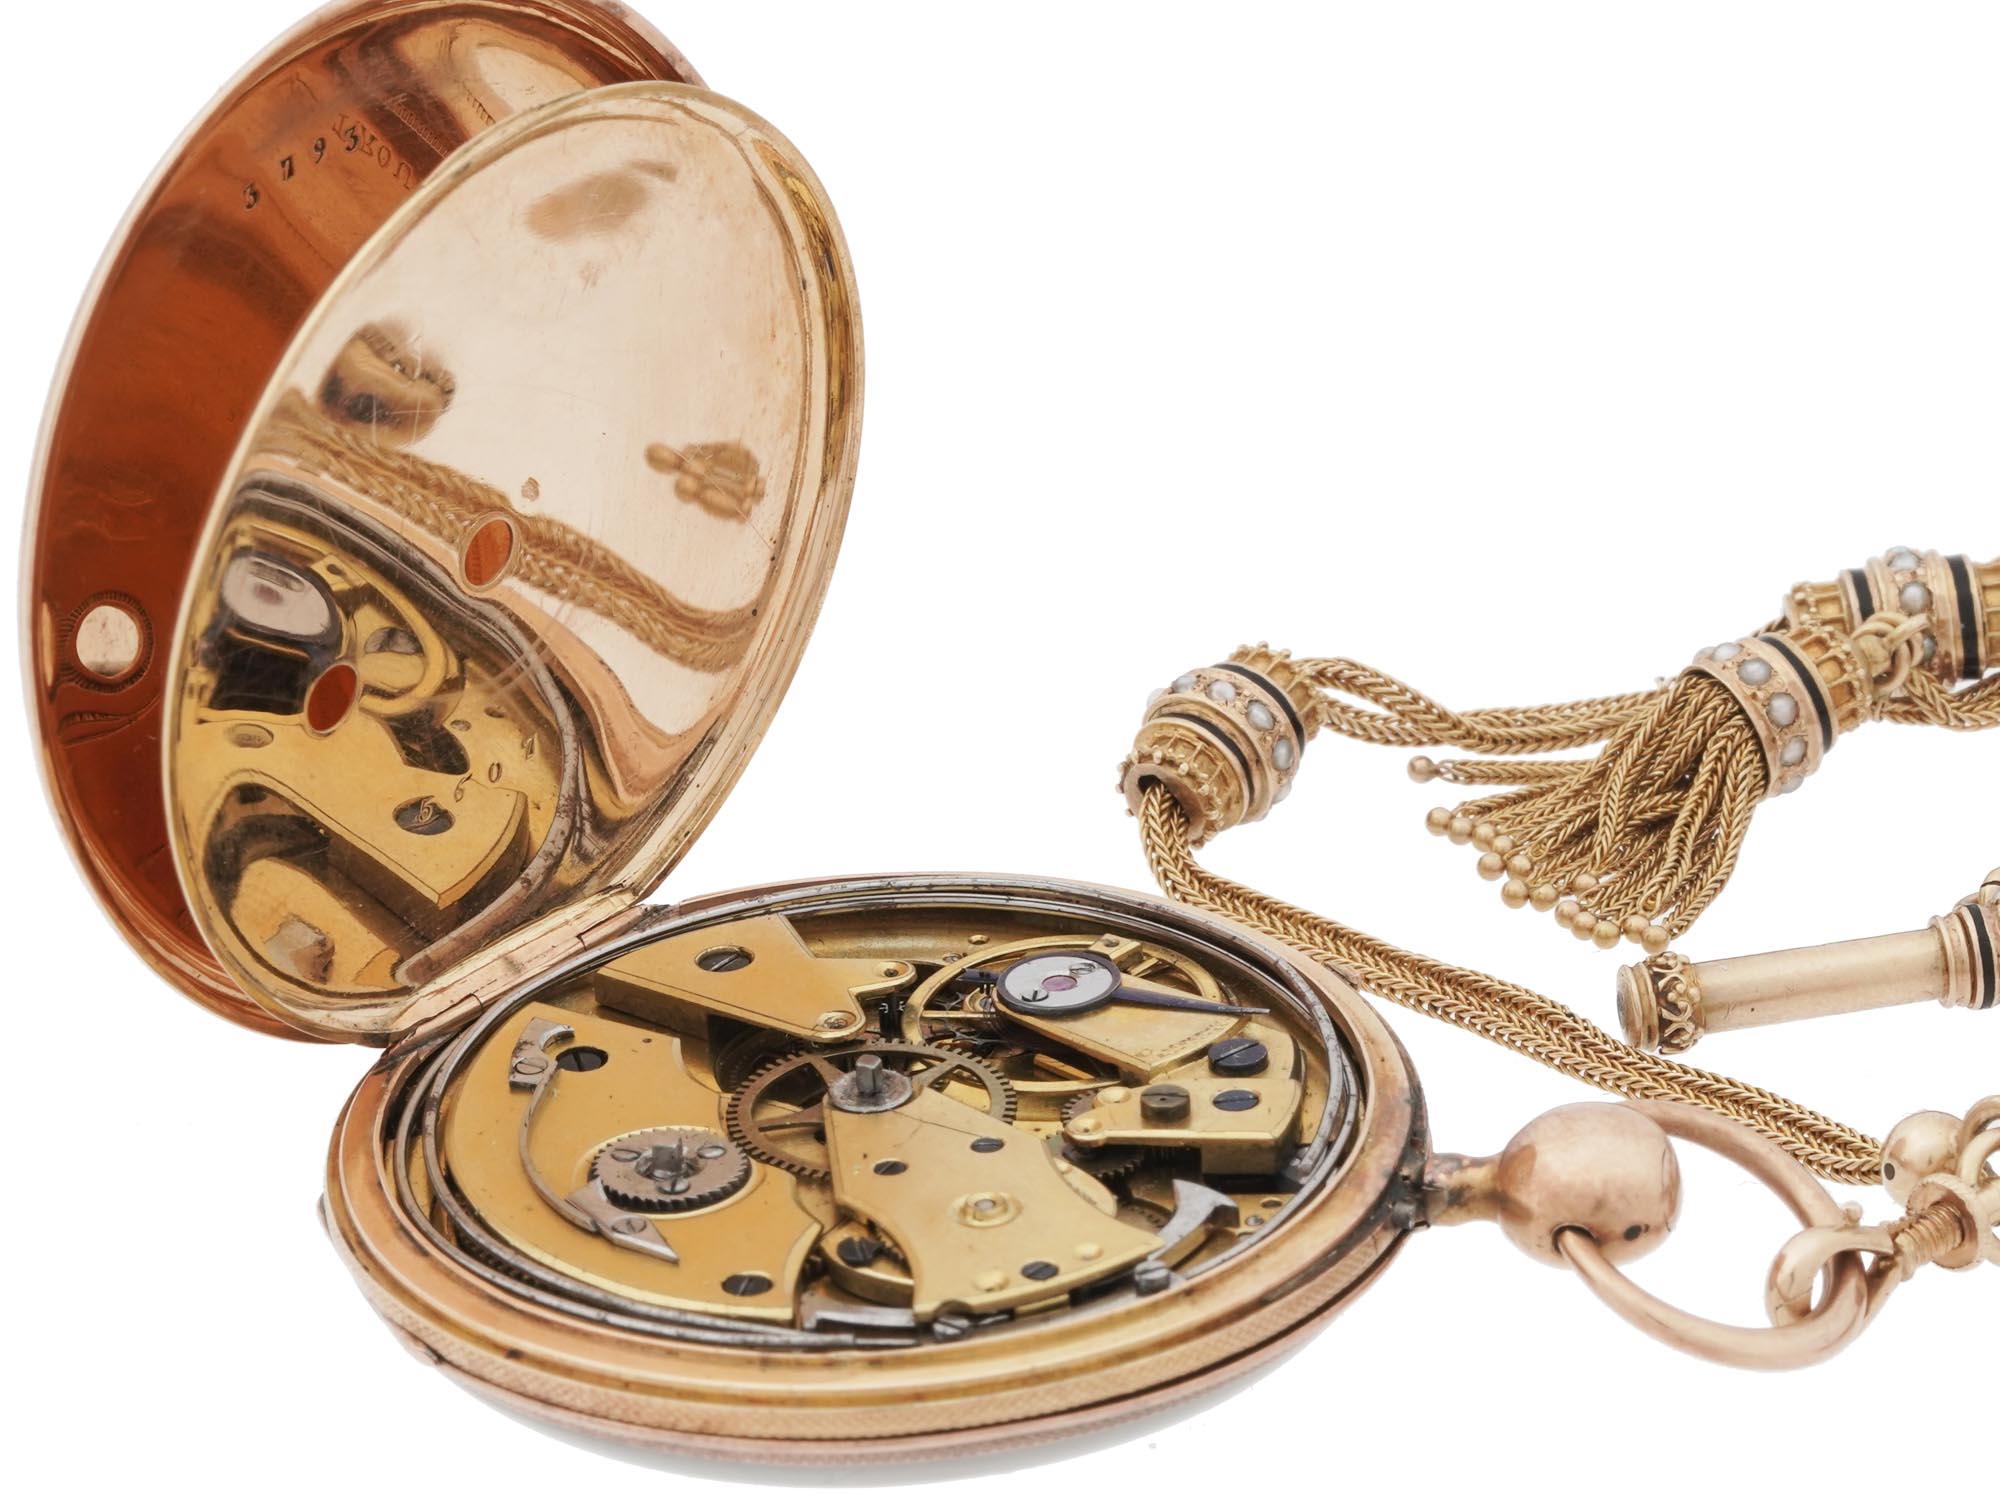 ANTIQUE FRENCH 14K GOLD POCKET WATCH CIRCA 1880 PIC-6